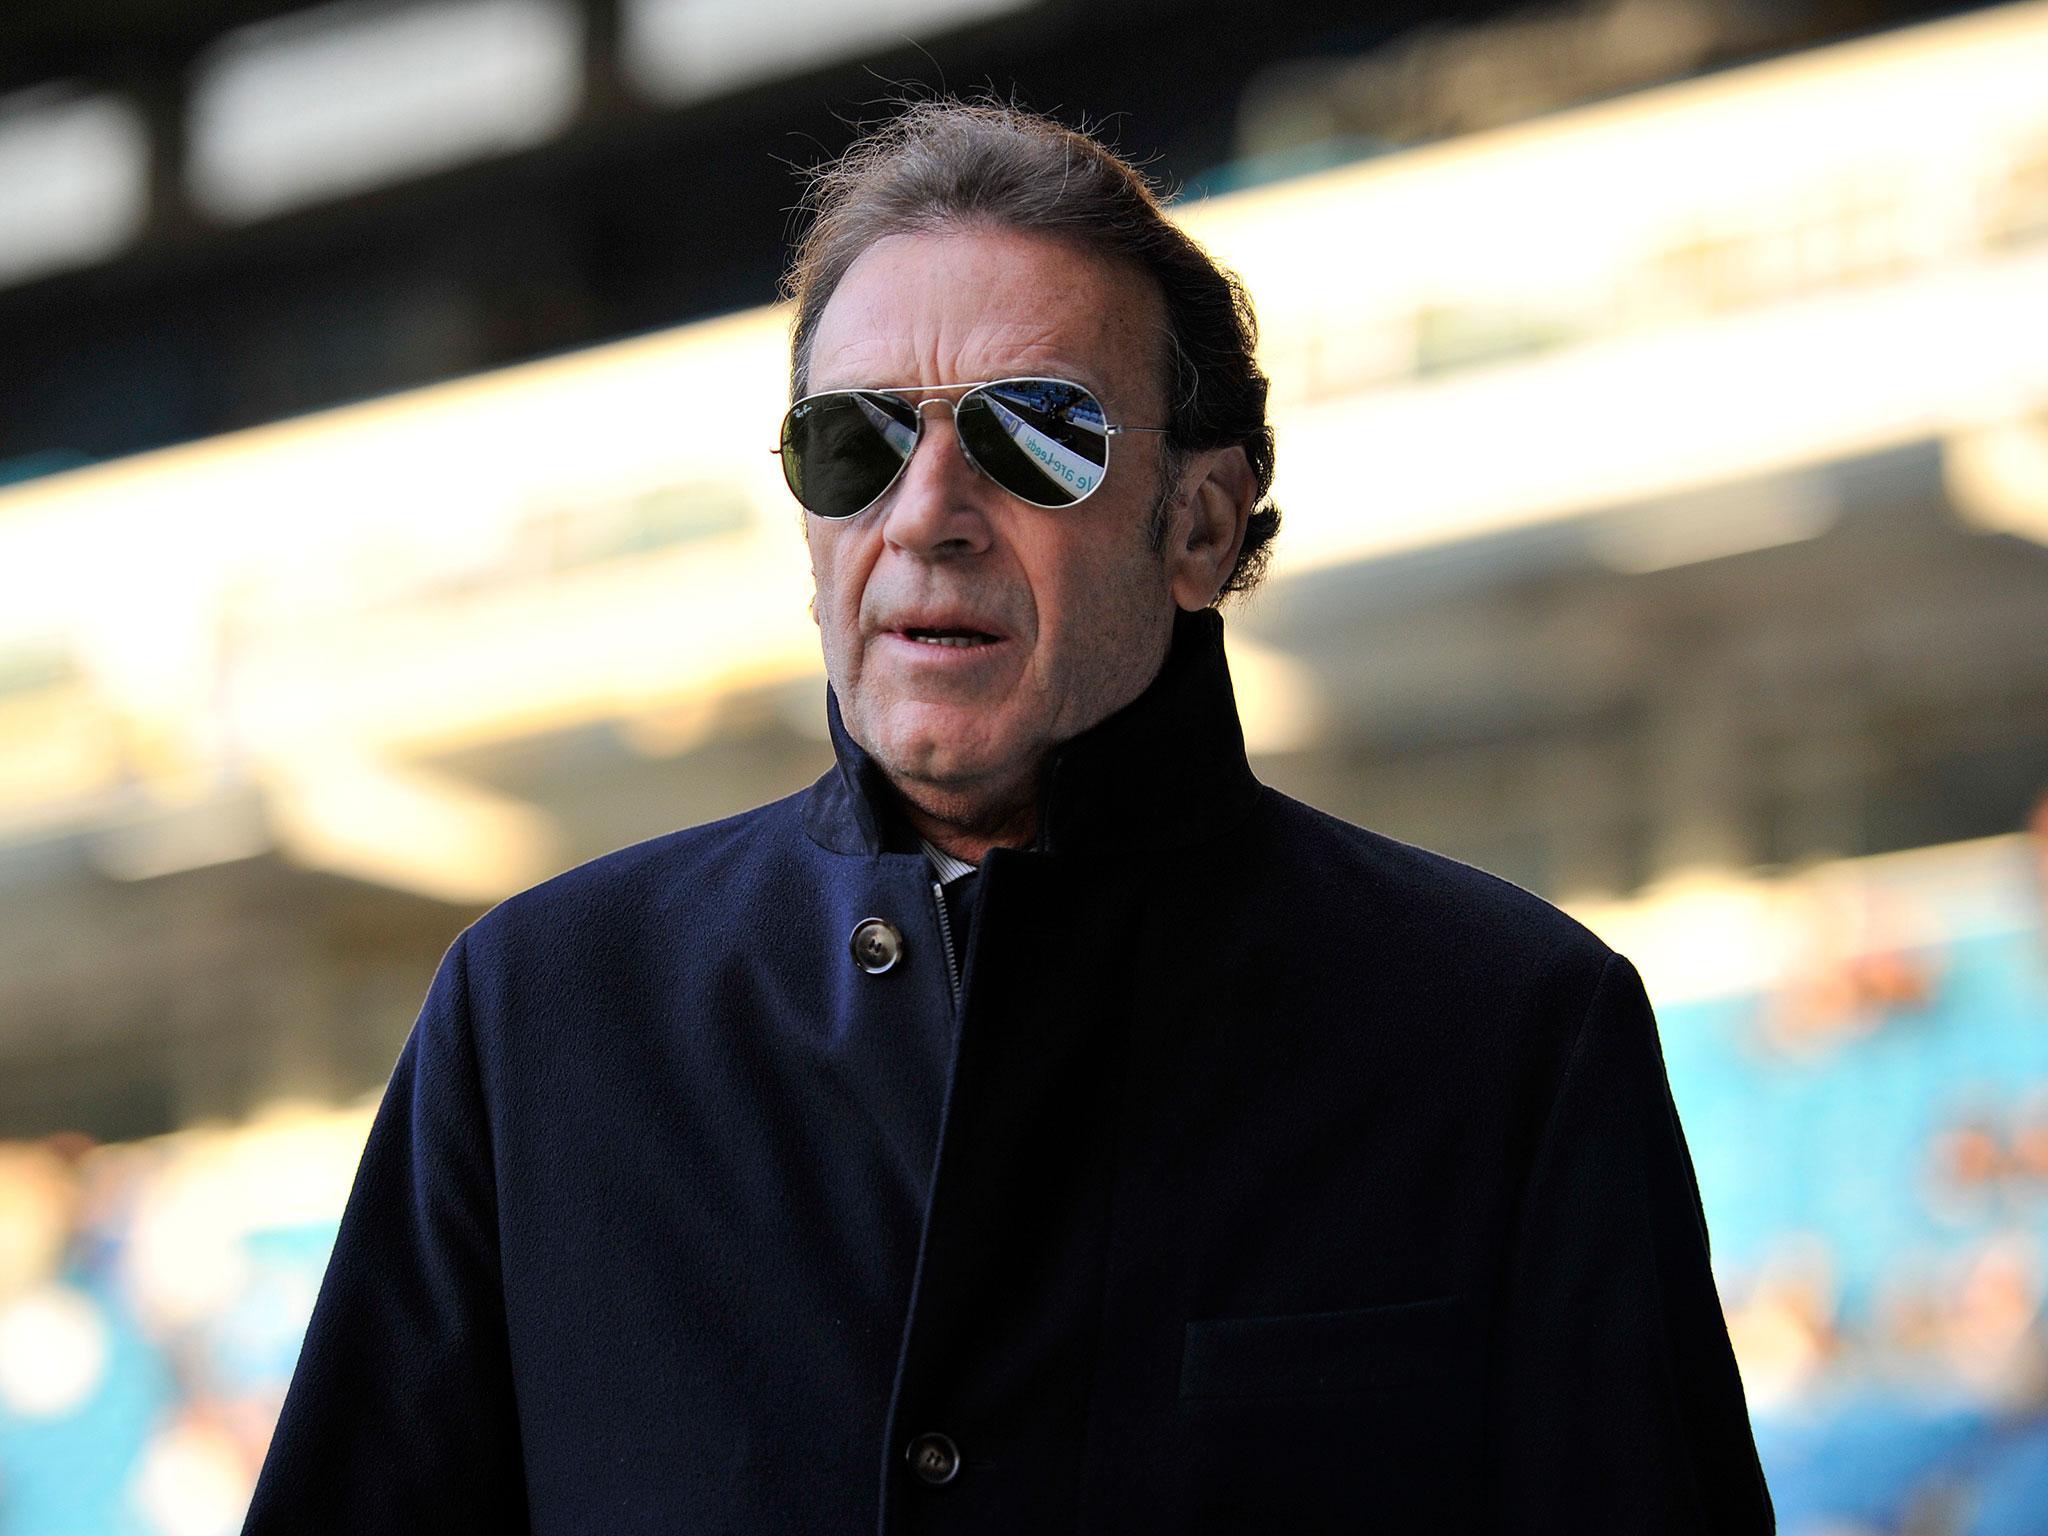 Massimo Cellino still owes Lucy Ward £360,000 after unfairly dismissing her from Leeds United